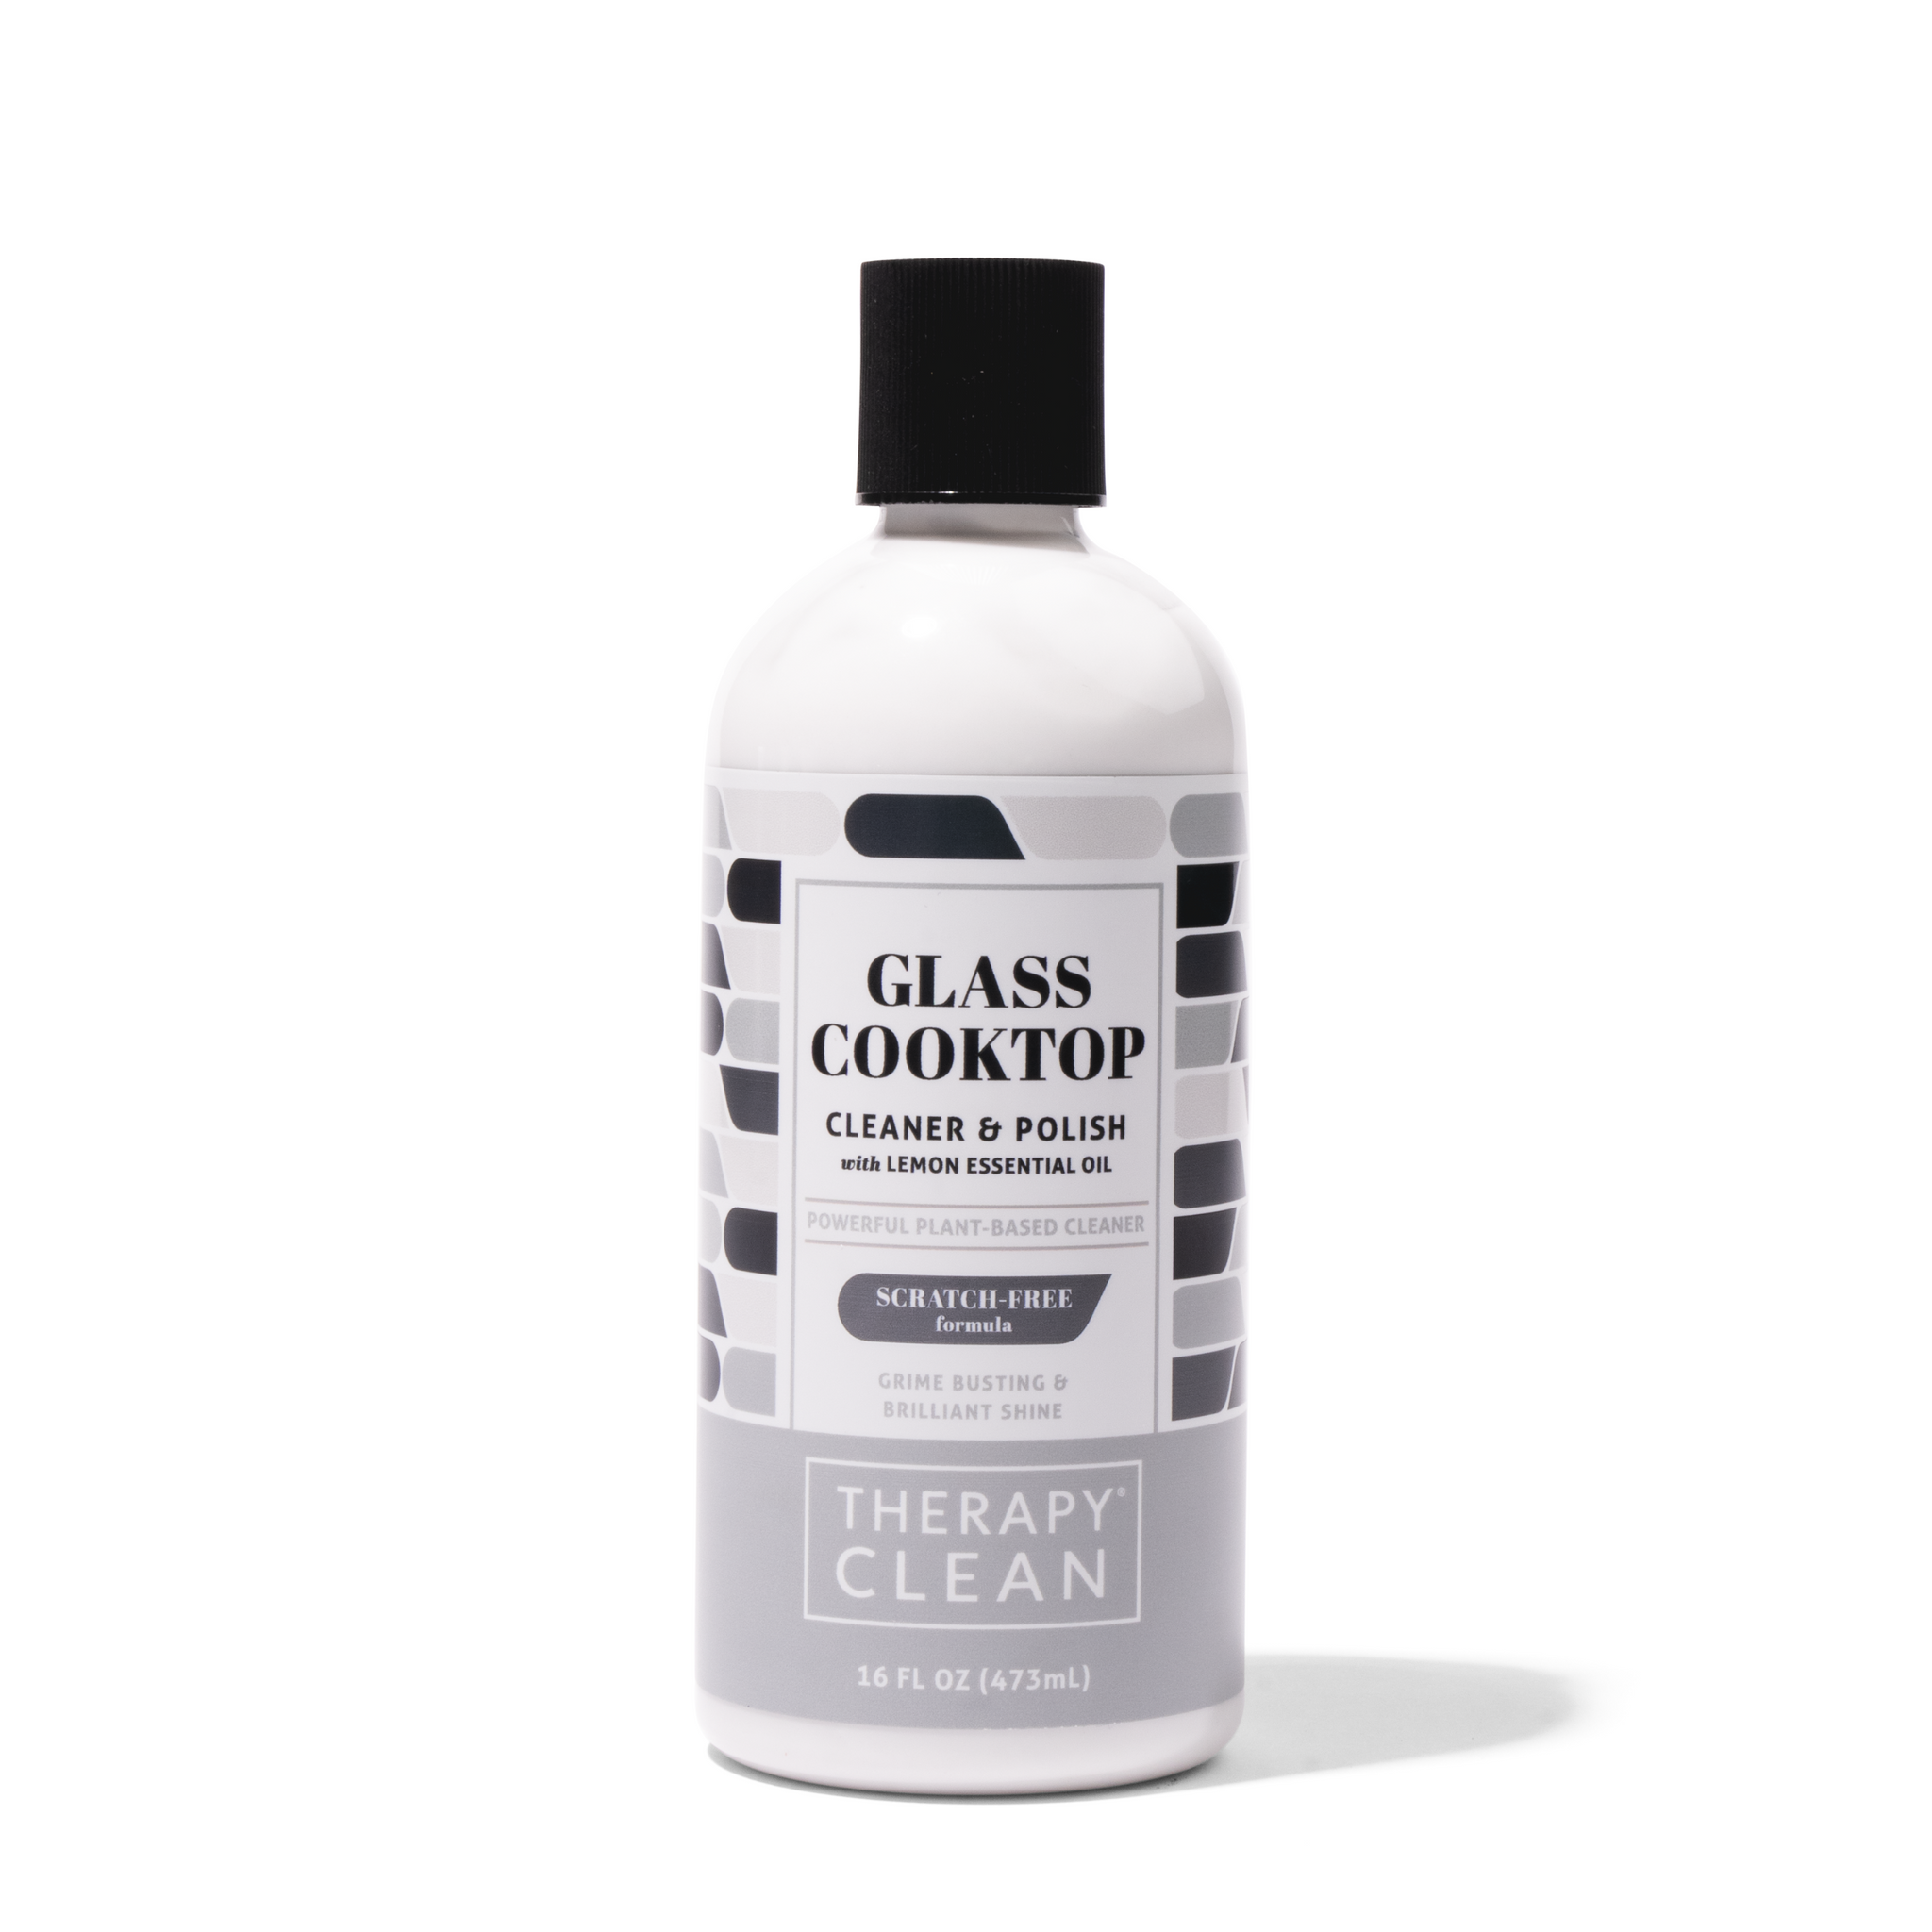 Glass Cooktop Cleaner & Polish 16 oz. – Therapy Clean